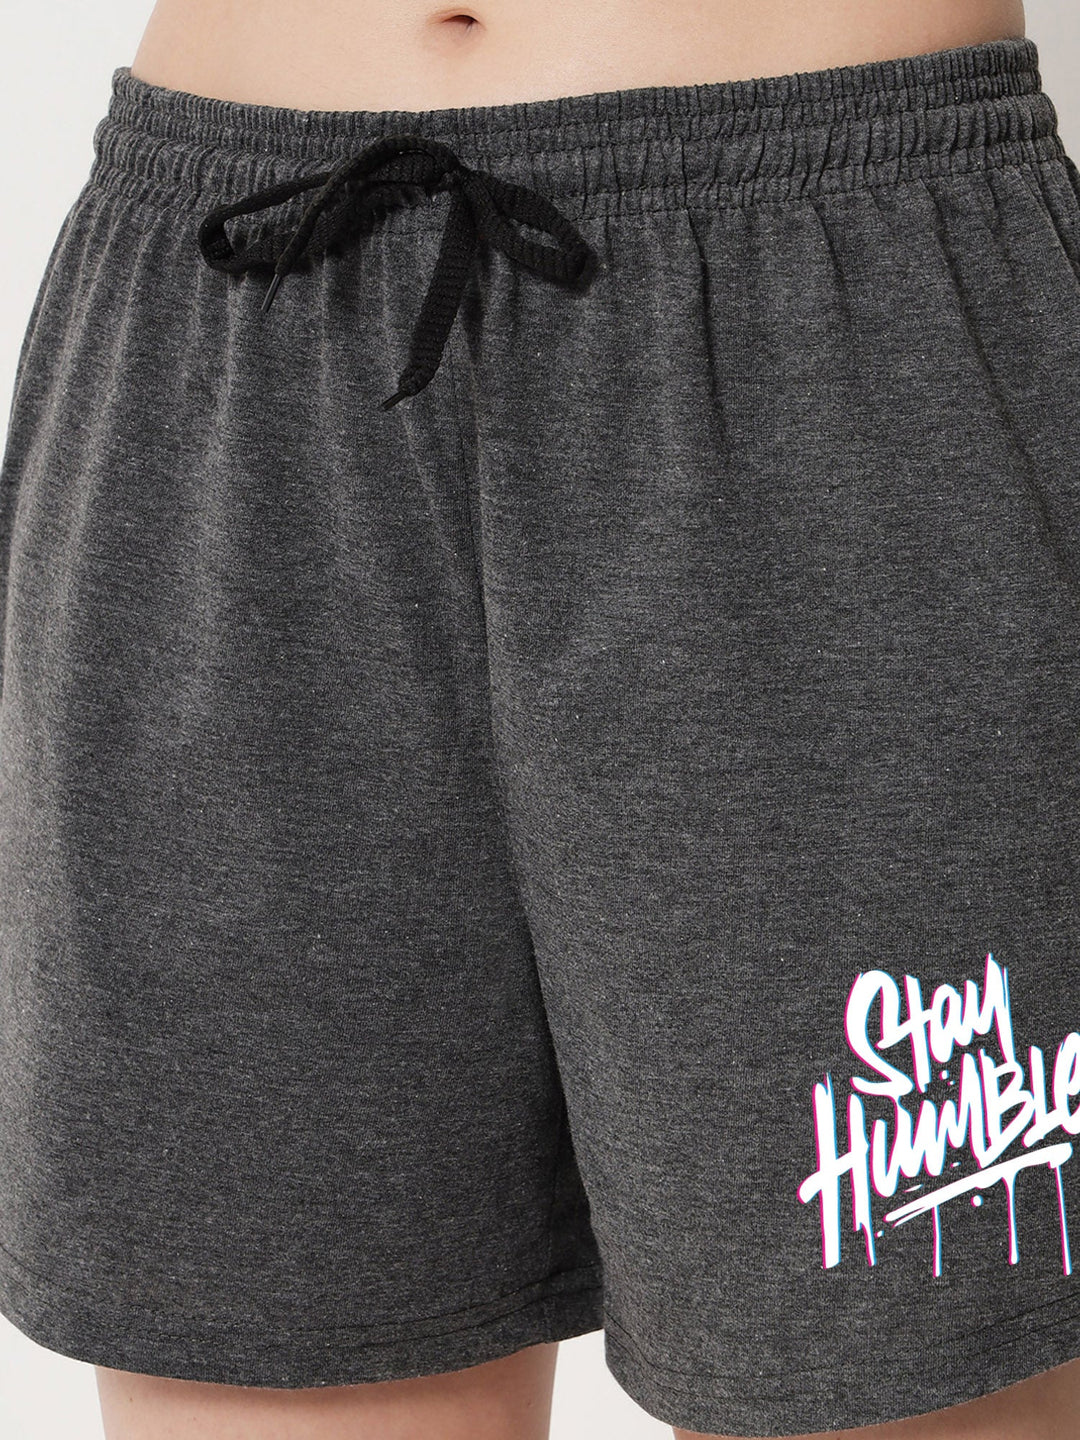 Stay Humble Cotton Girls T Shirt and Short Set